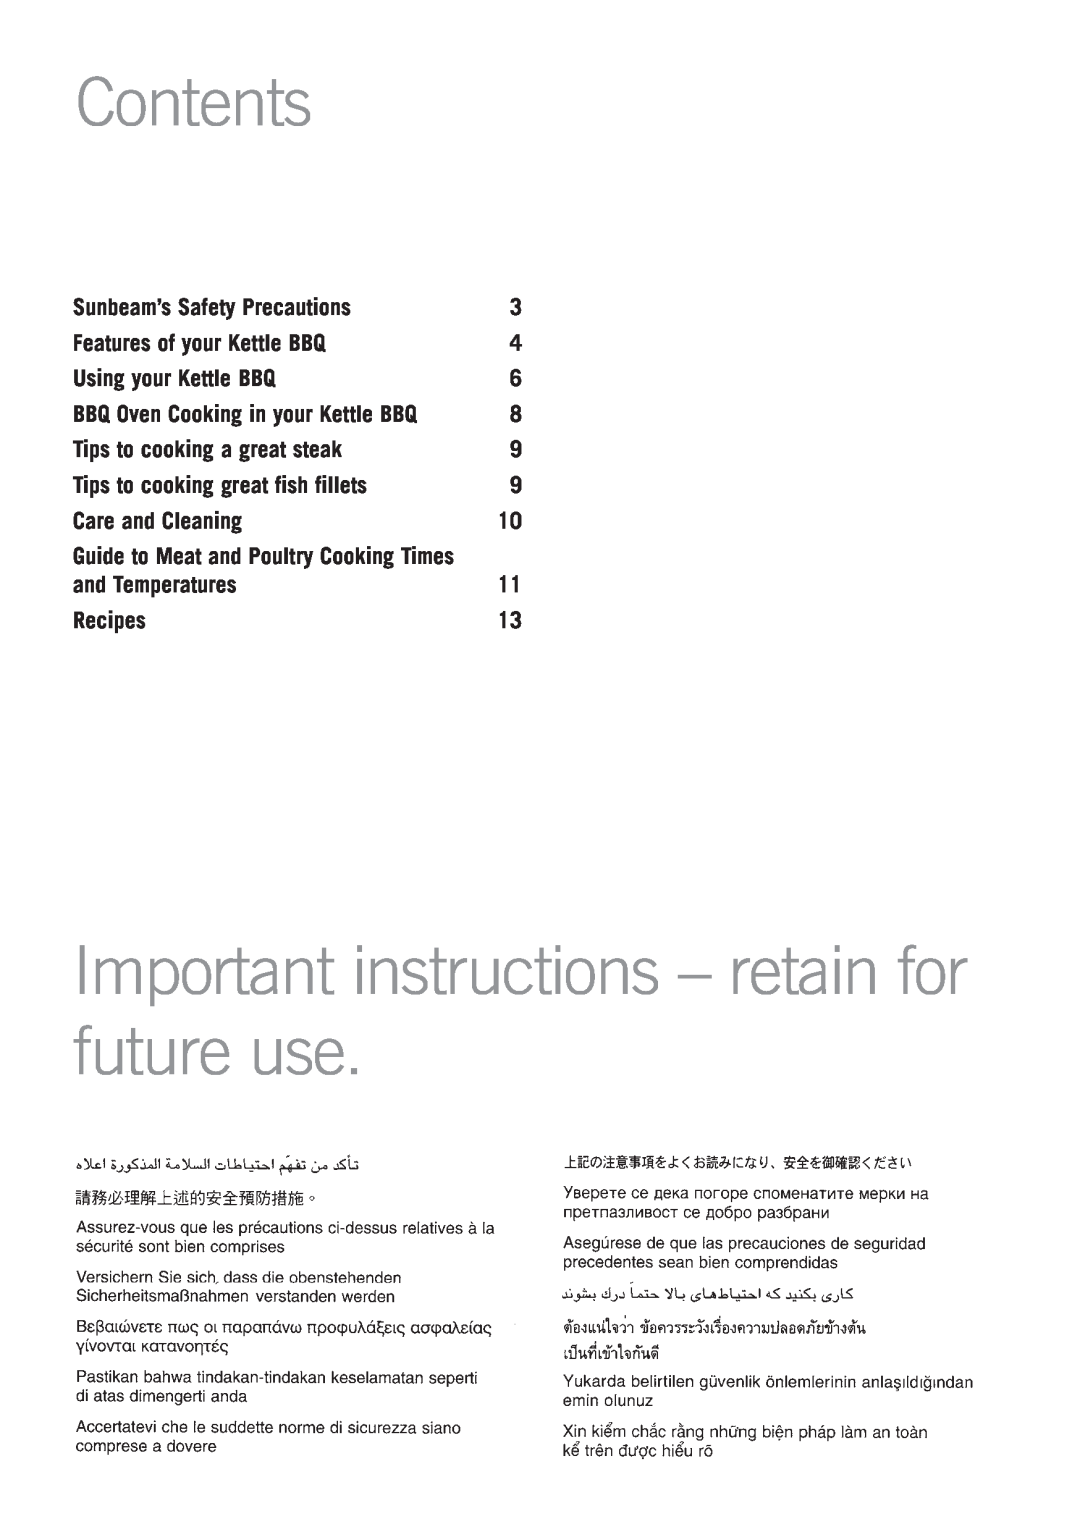 Sunbeam HG5400 Contents, Important instructions - retain for future use, Sunbeam’s Safety Precautions, Care and Cleaning 